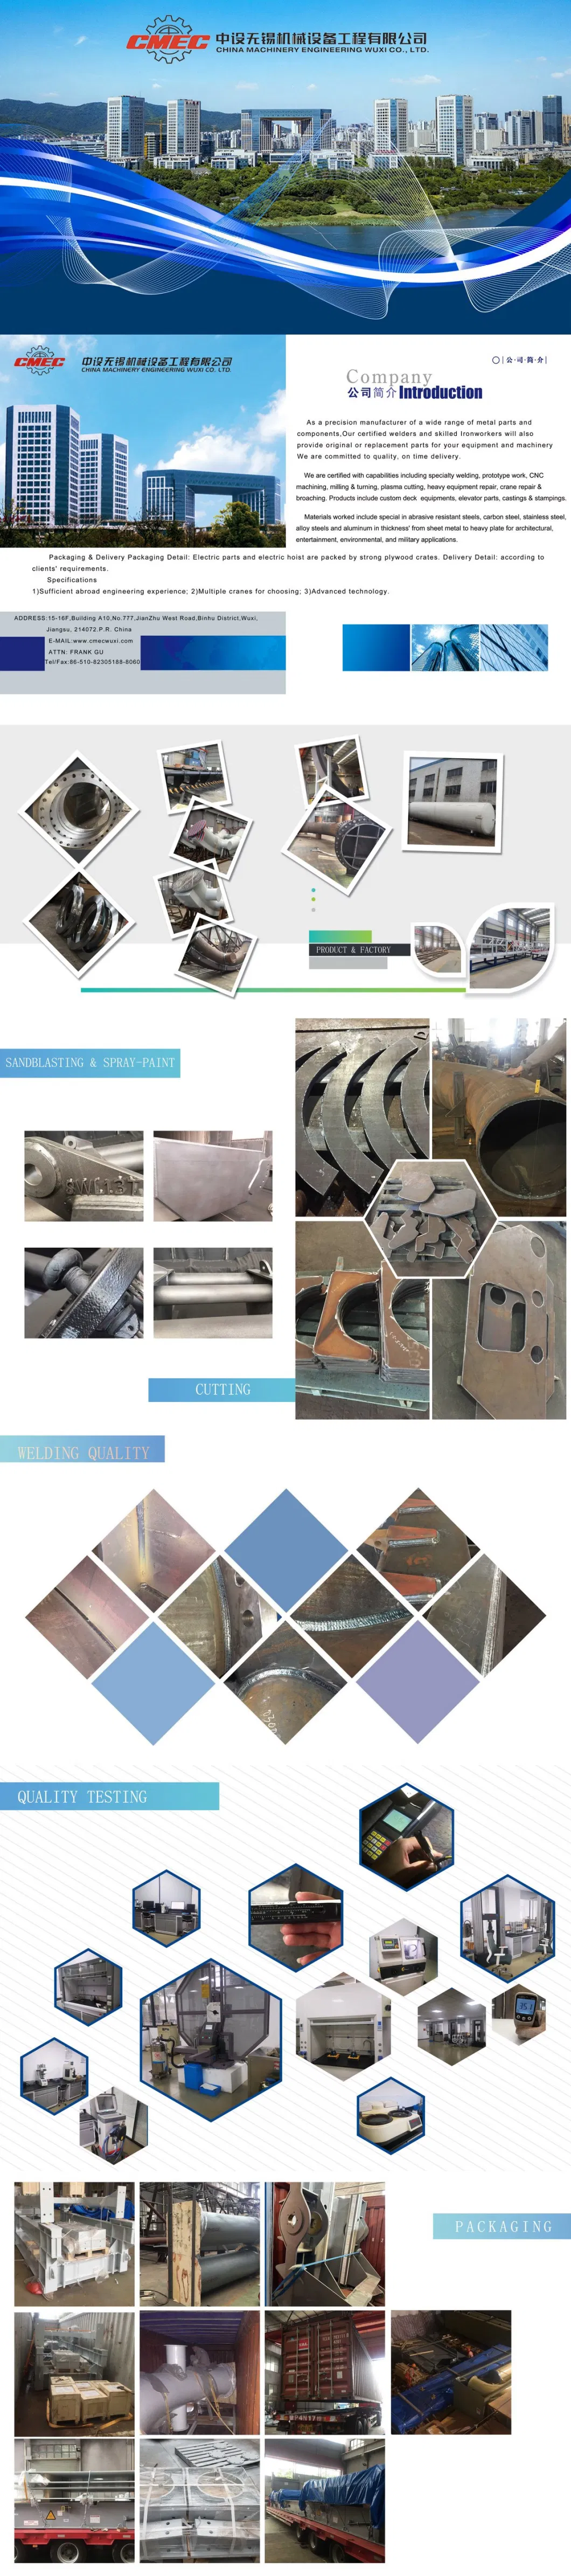 Q235 Material Customized Weld Service Supplier for Prefabricated Metal Parts-Bend Pipes